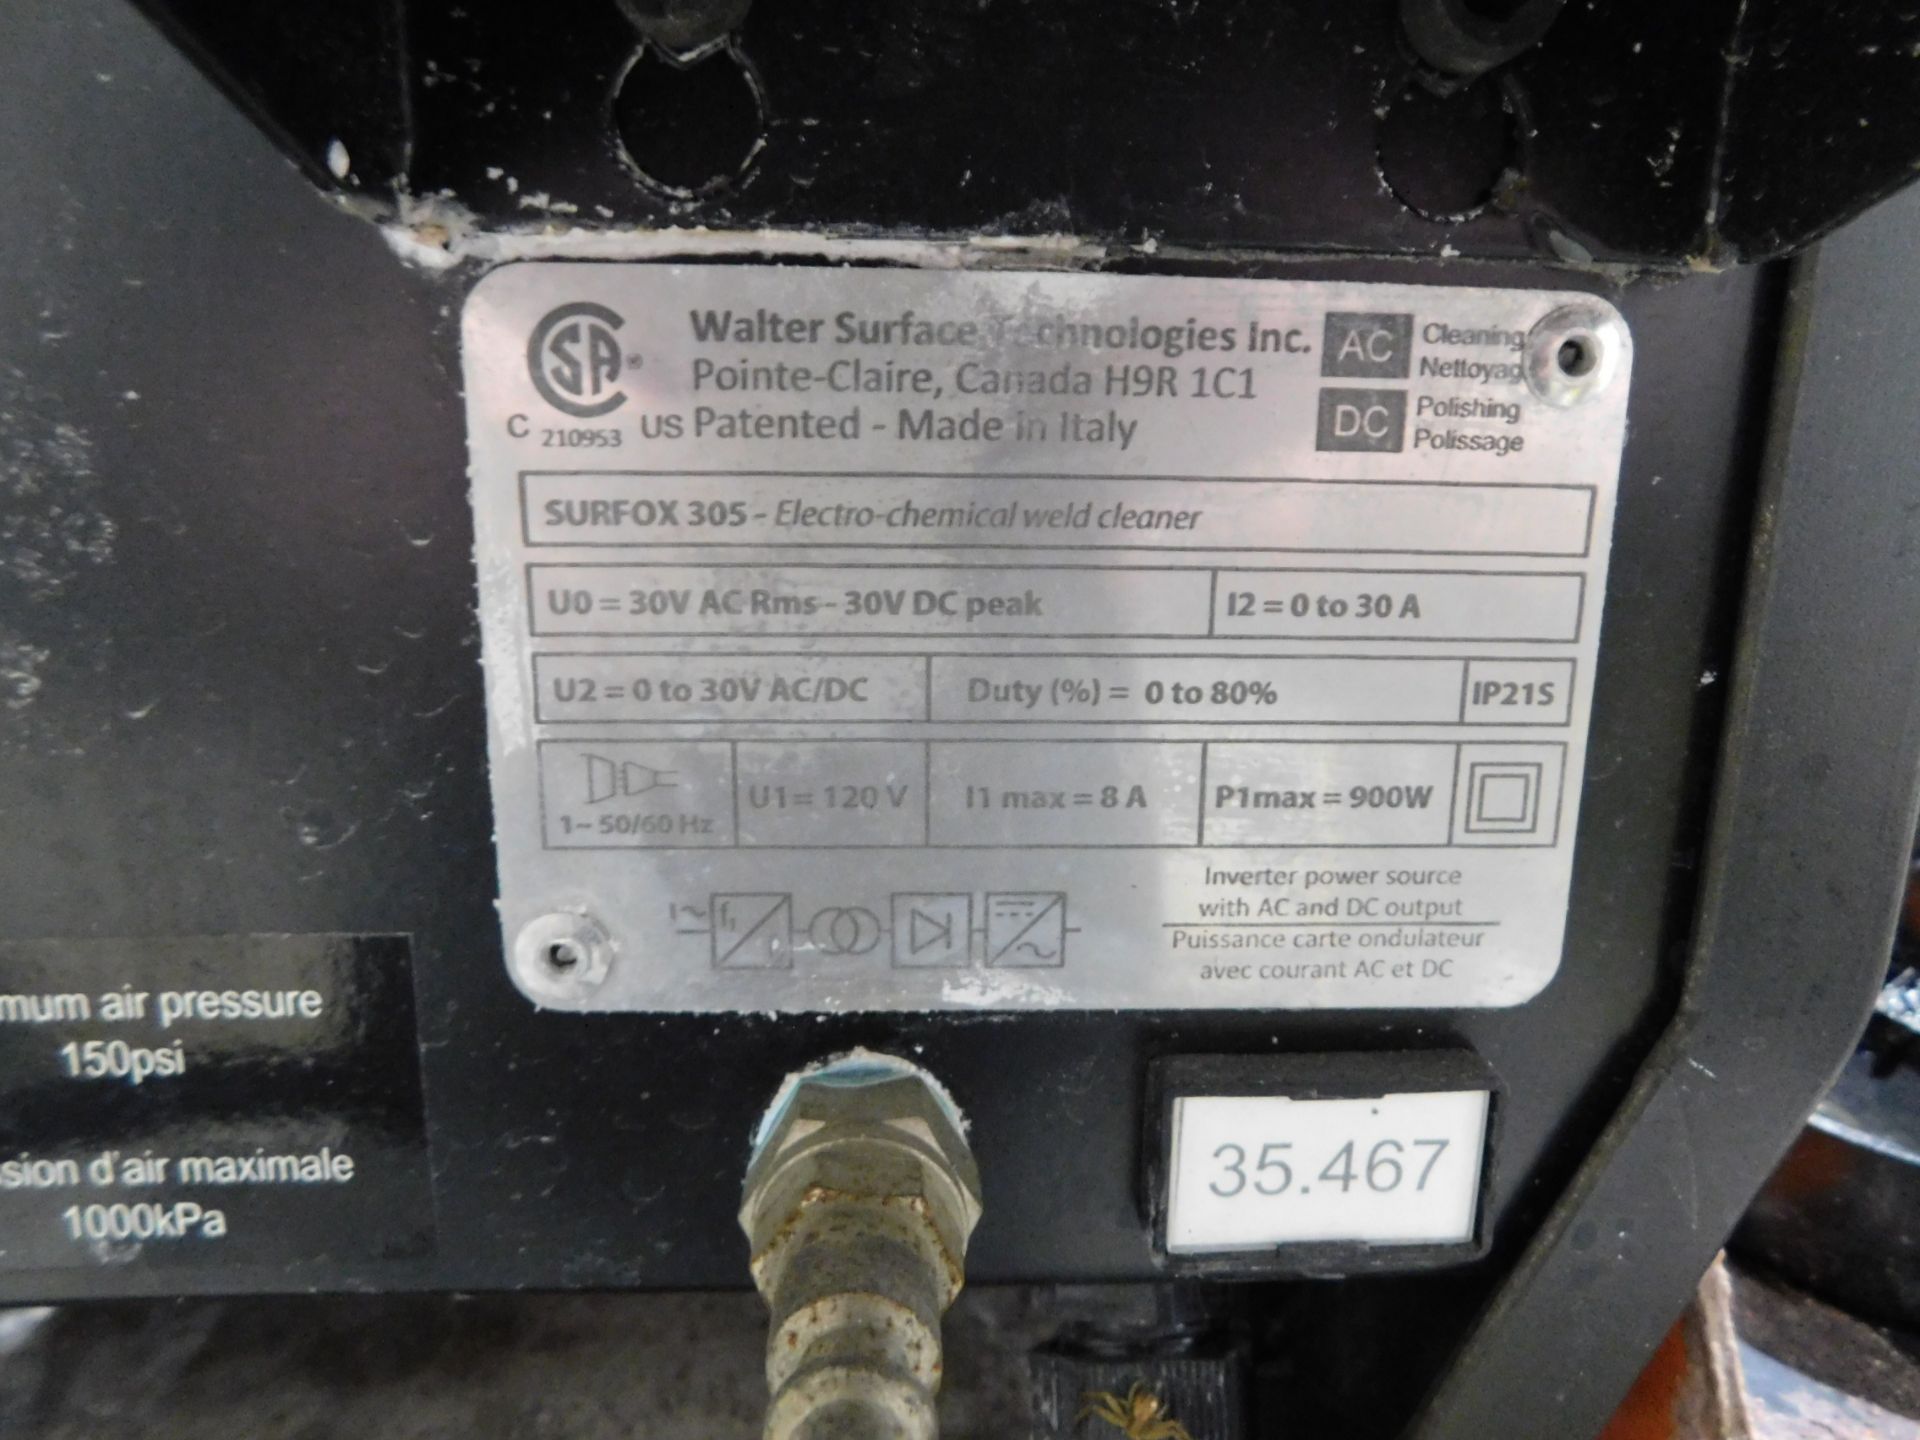 Walter Surfox Model 305 Electrochemical Weld Cleaning and Passivation Unit - Image 5 of 5